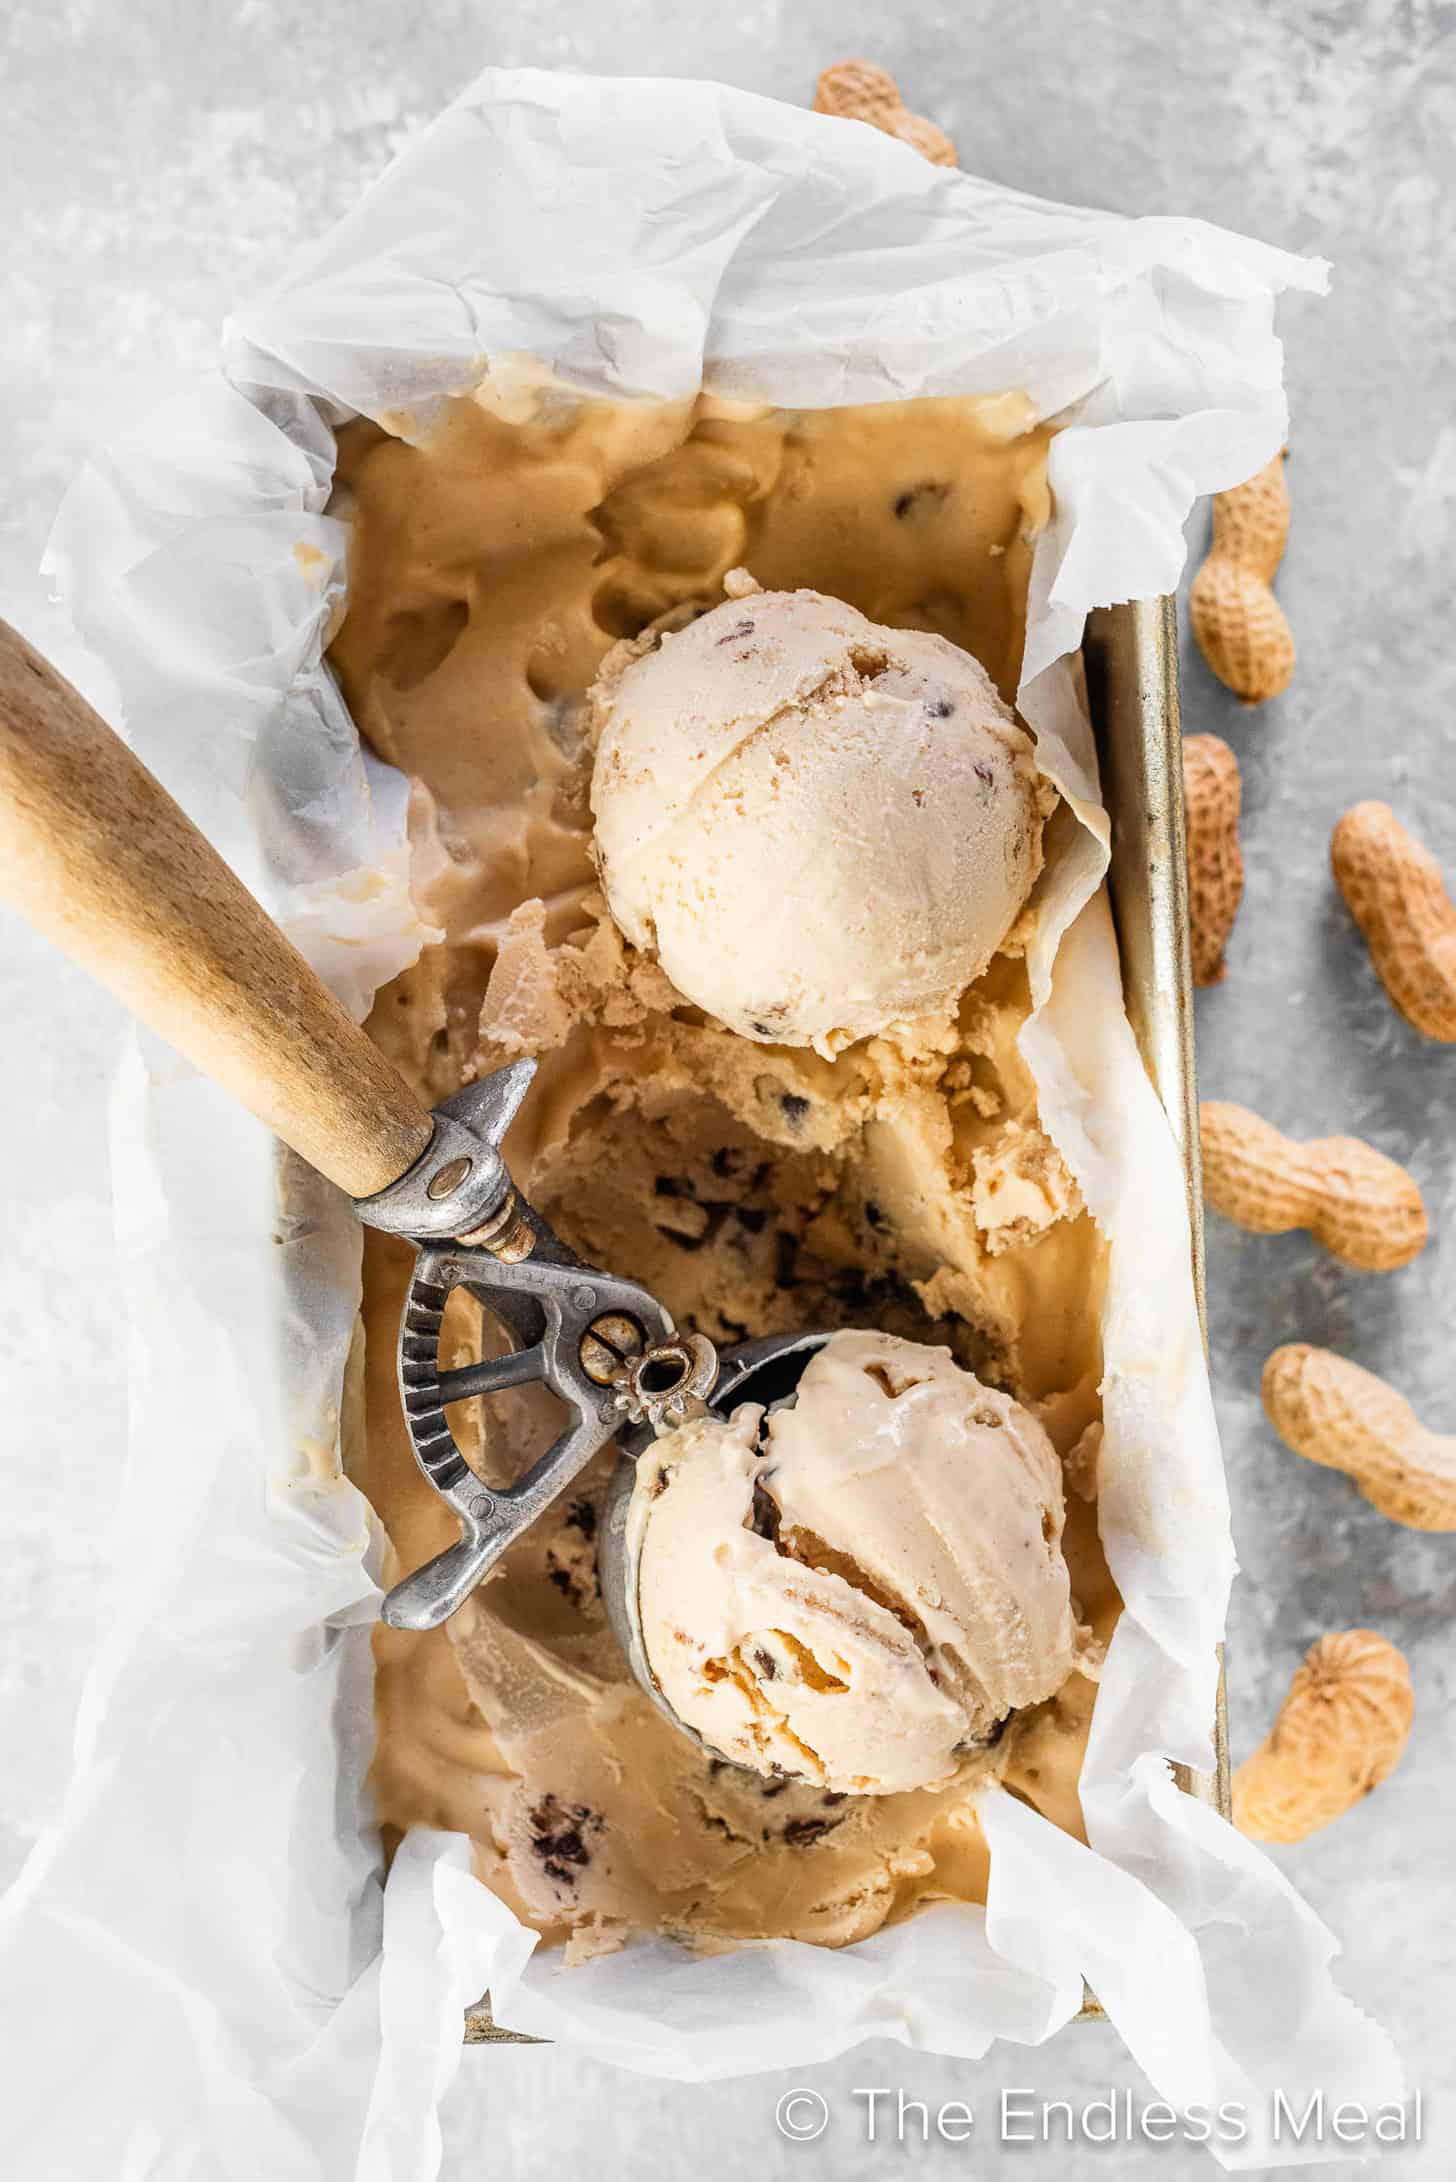 An ice cream scoop scooping out balls of Peanut Butter Cookie Dough Ice Cream from a container.